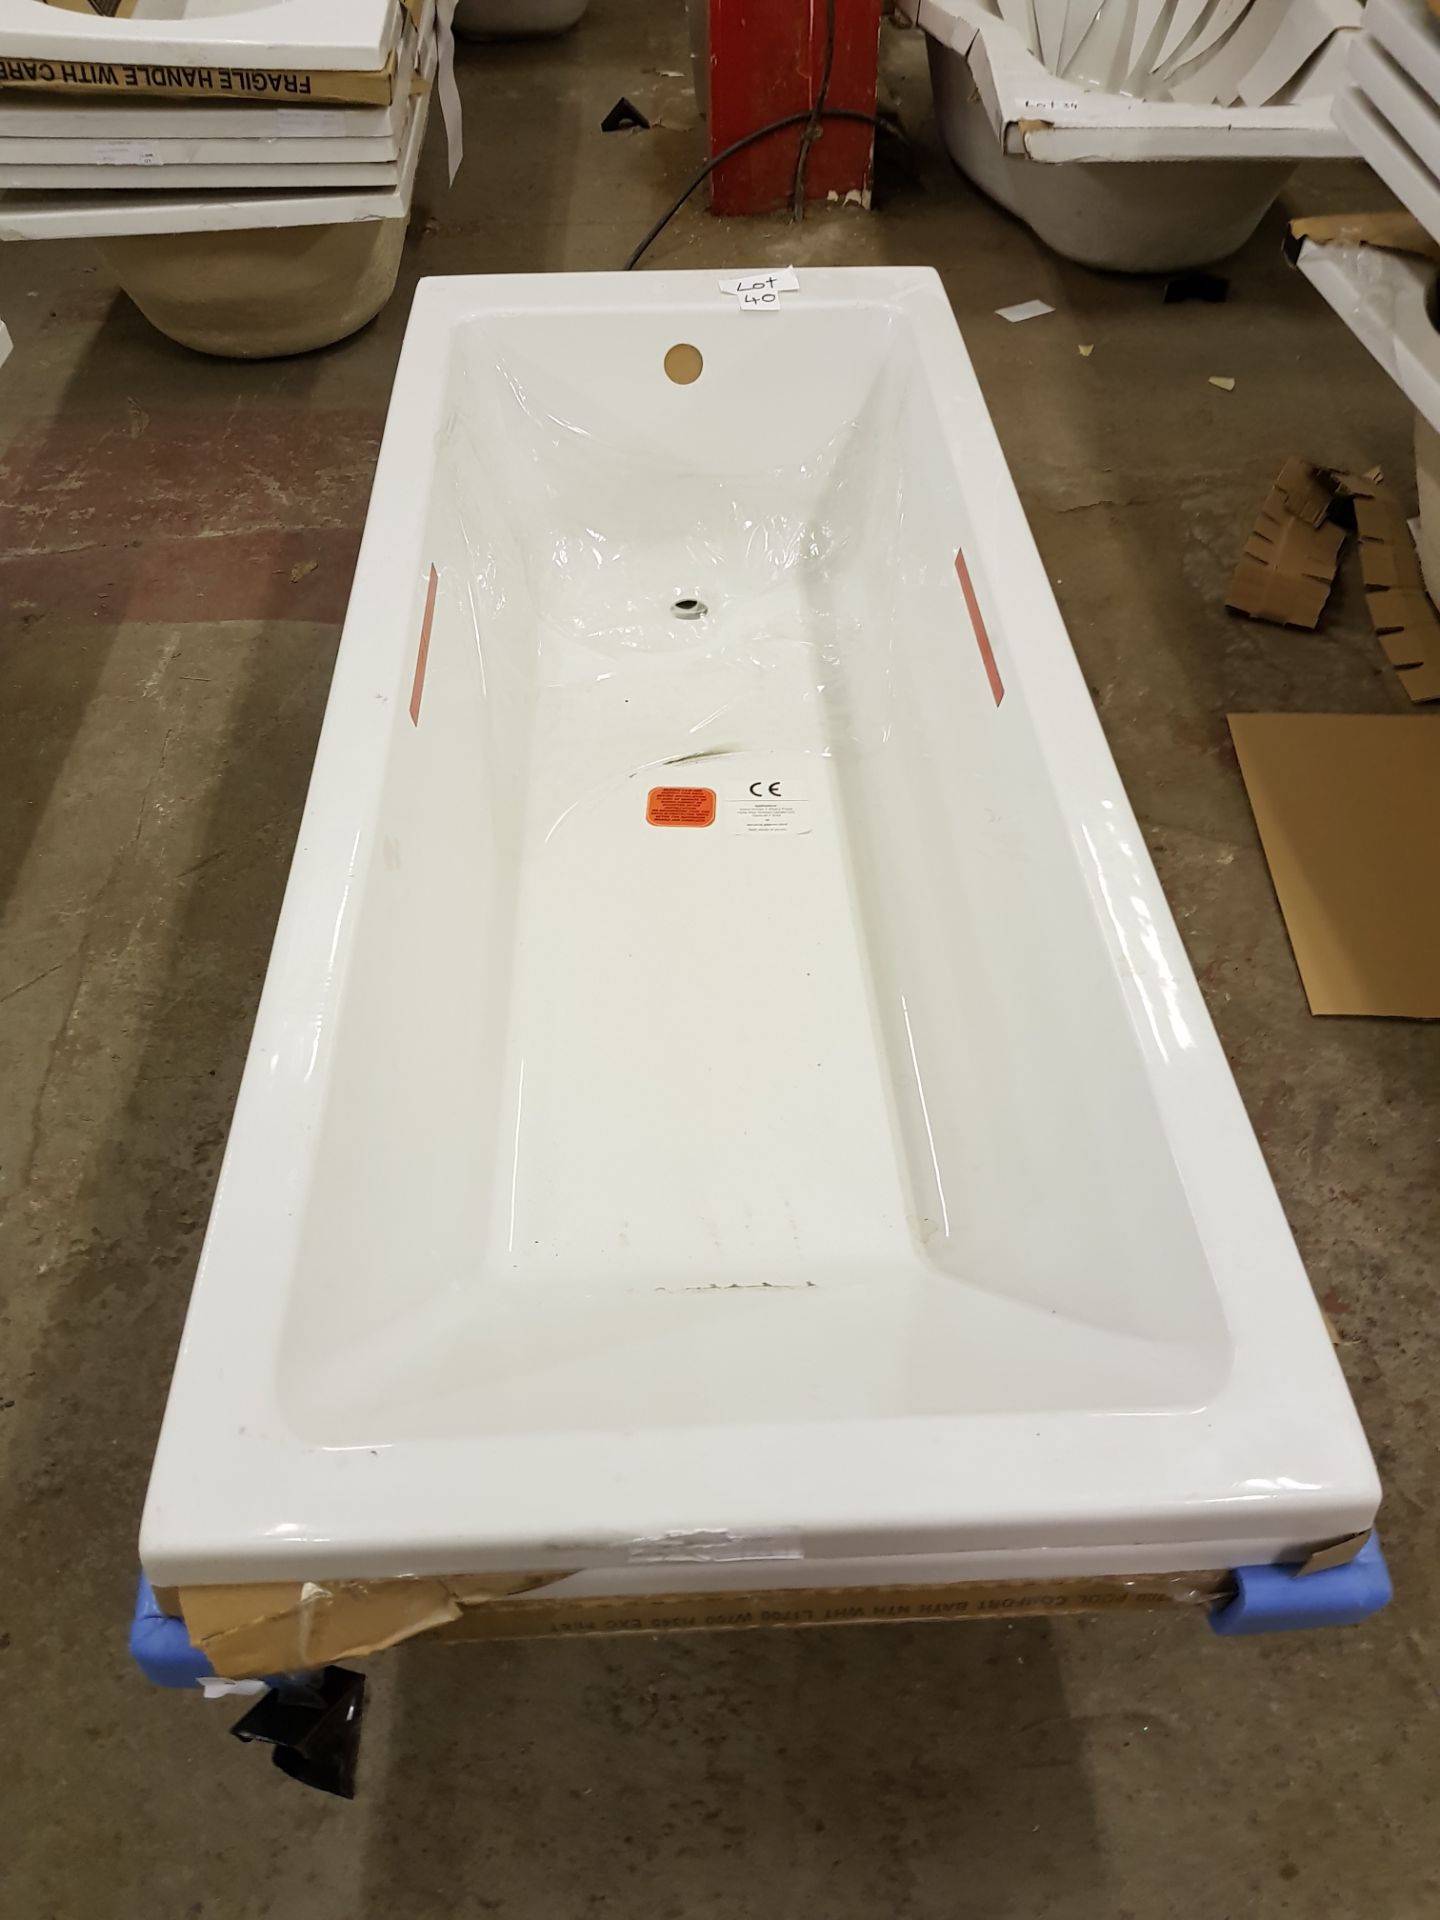 1700x700 single ended watersaving square bath. - Image 2 of 2